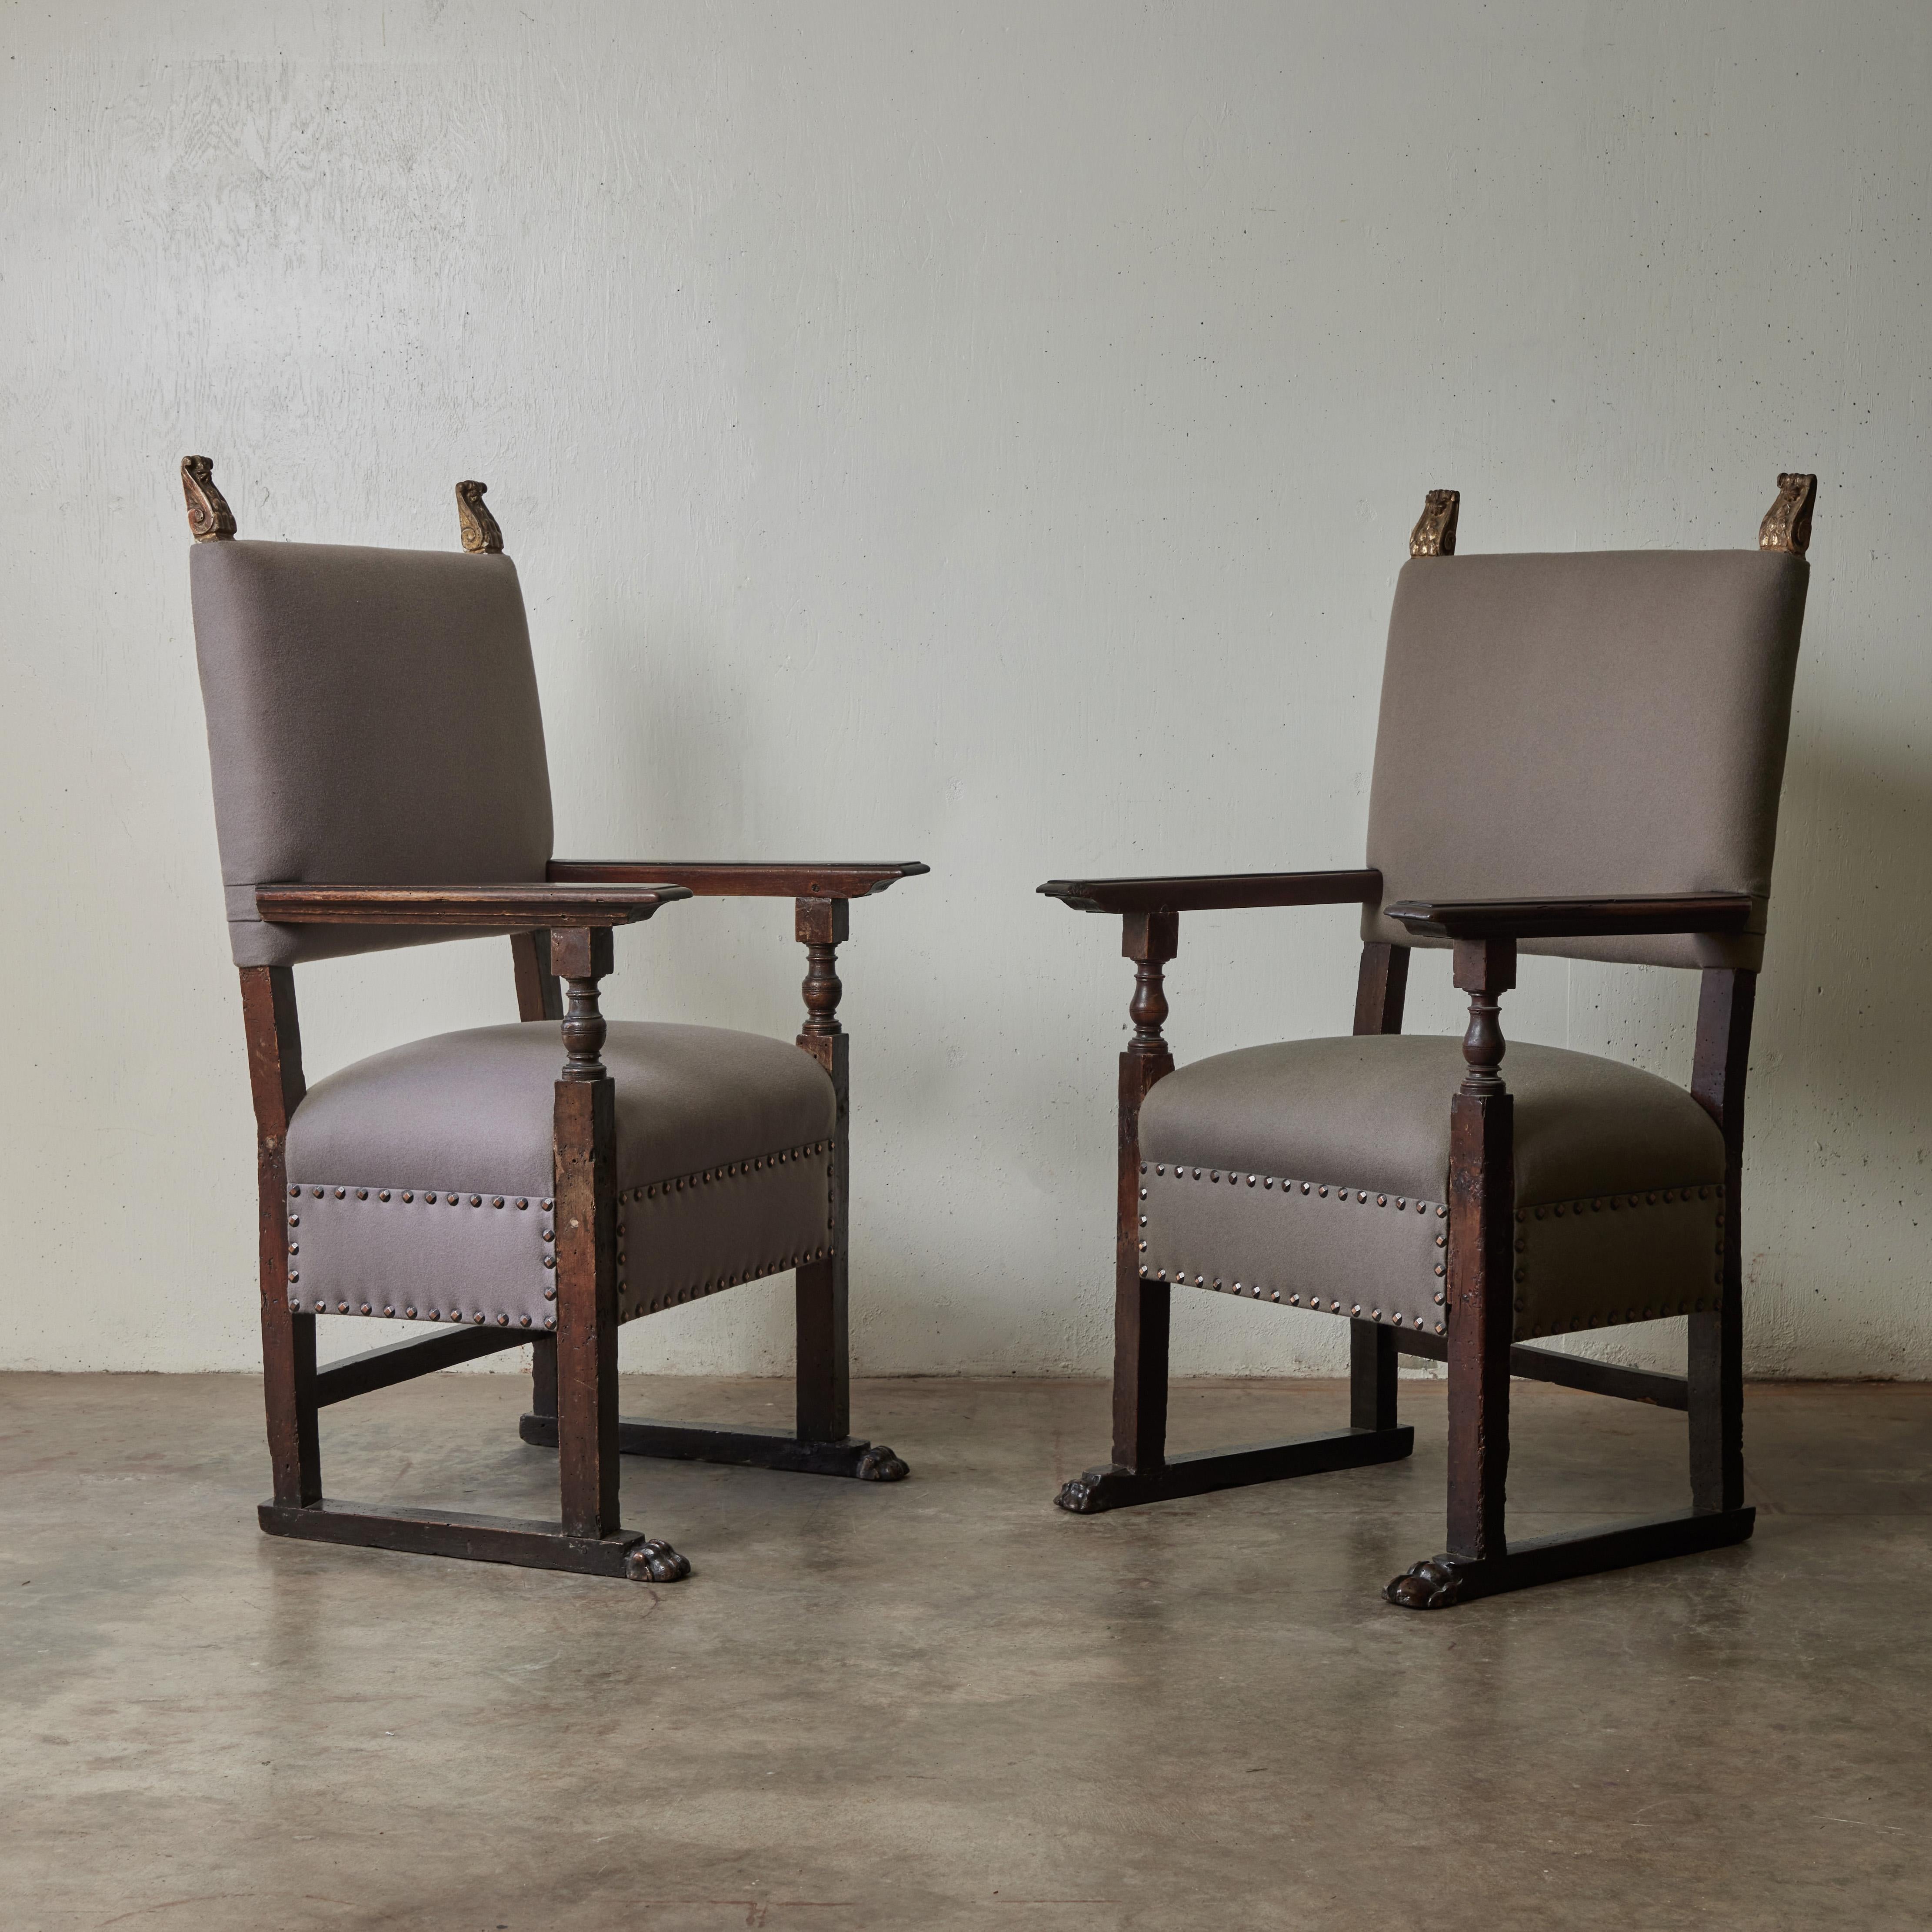 Pair of 18th-century Italian carved walnut arm chairs with gilt accenting and custom grey colored wool flanneled upholstery. A wonderful mix of Baroque elegance and modern restraint, the pair adds an updated touch of old-world glamour to any space.